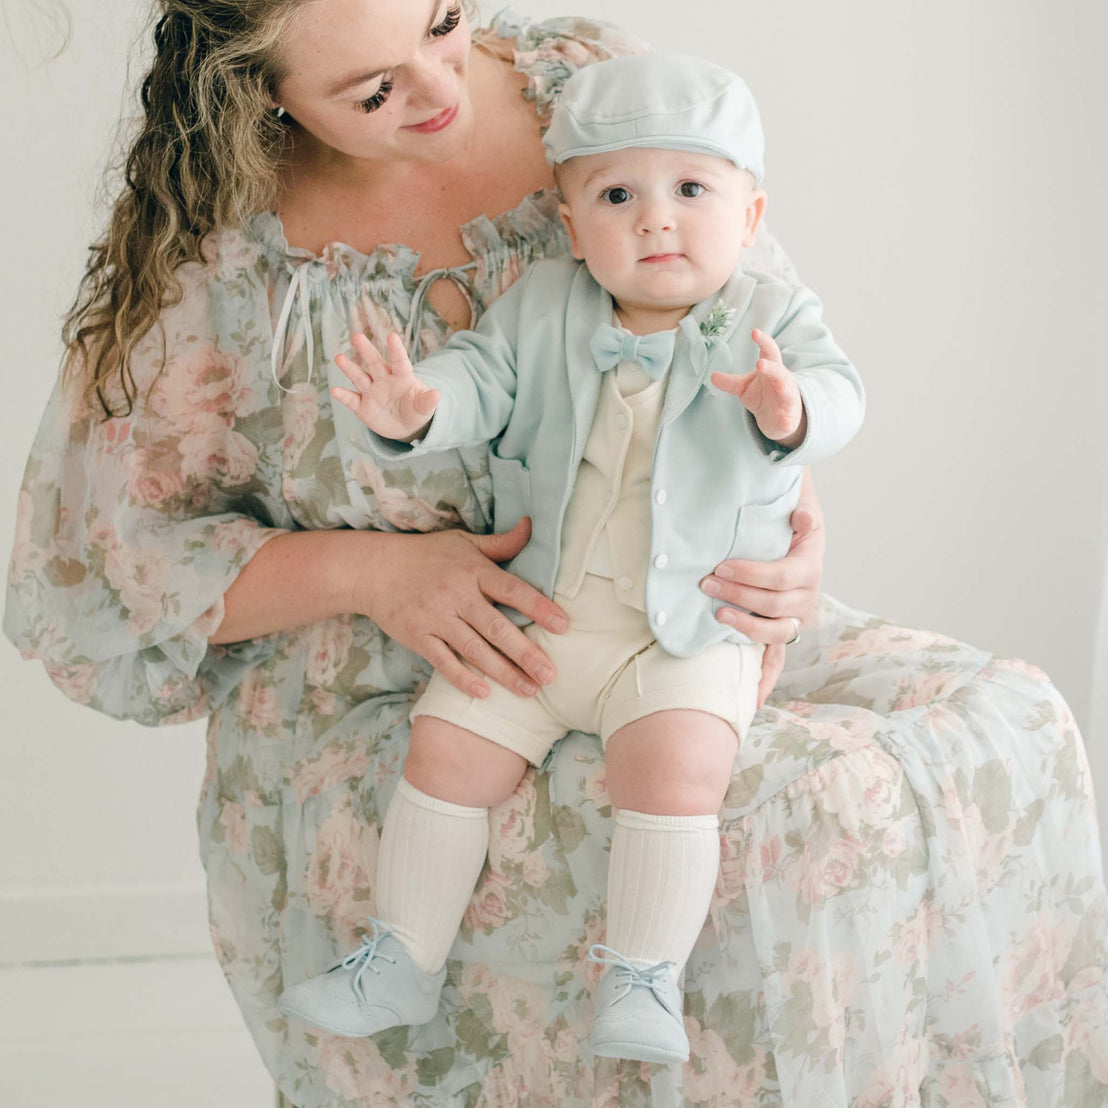 Baby boy sitting on his mother's lap. He is wearing the Ezra 4-Piece Powder Blue Suit with matching Newsboy Cap, blue velvet bow tie and boutonniere